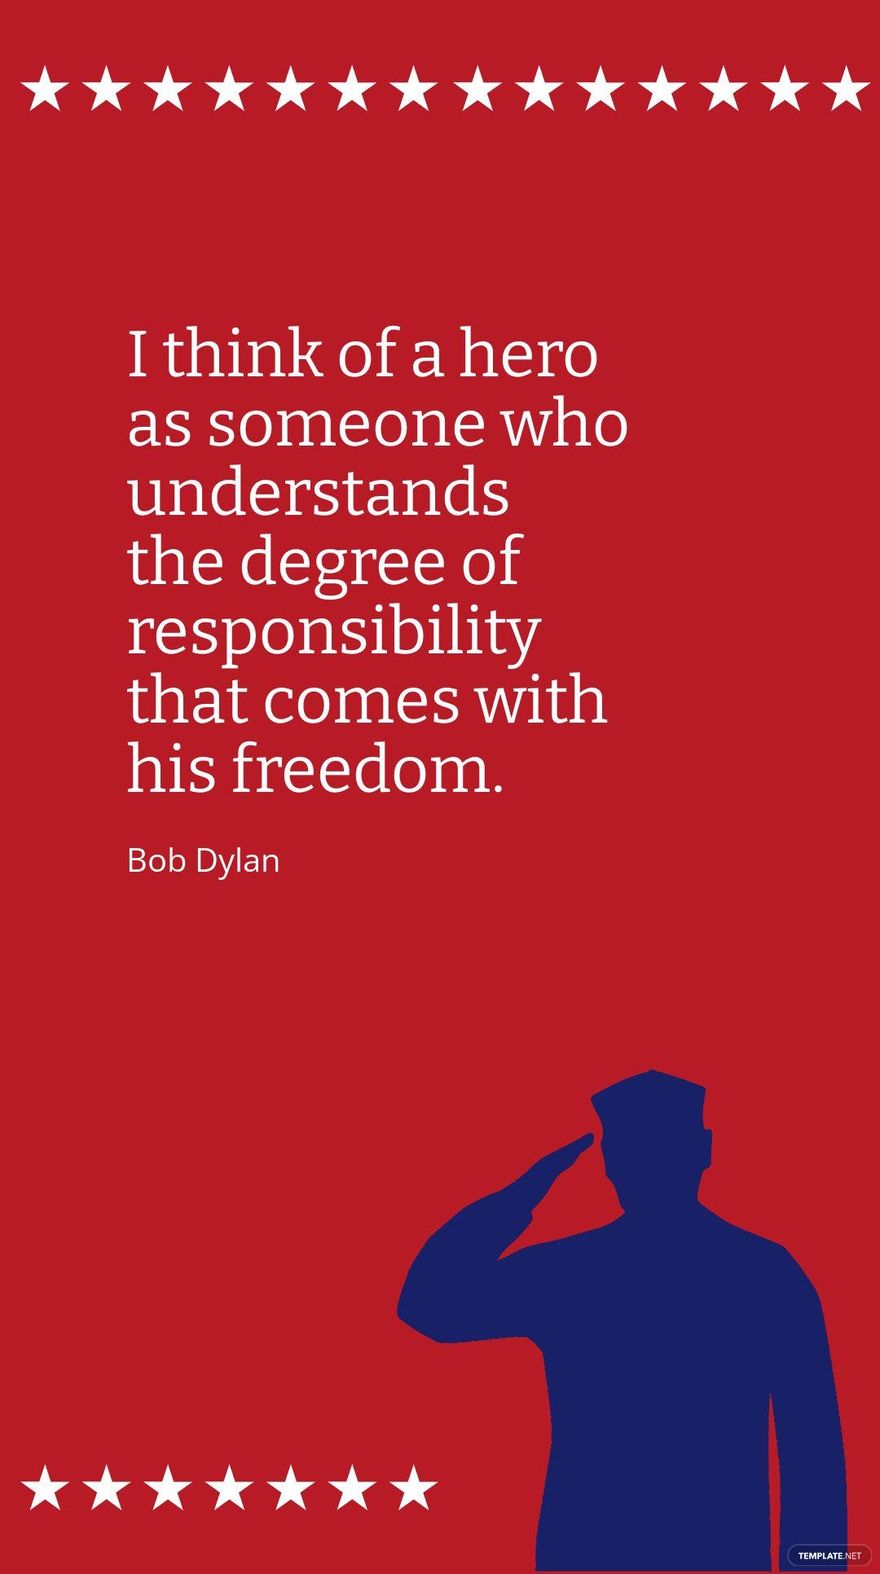 Bob Dylan - I think of a hero as someone who understands the degree of responsibility that comes with his freedom